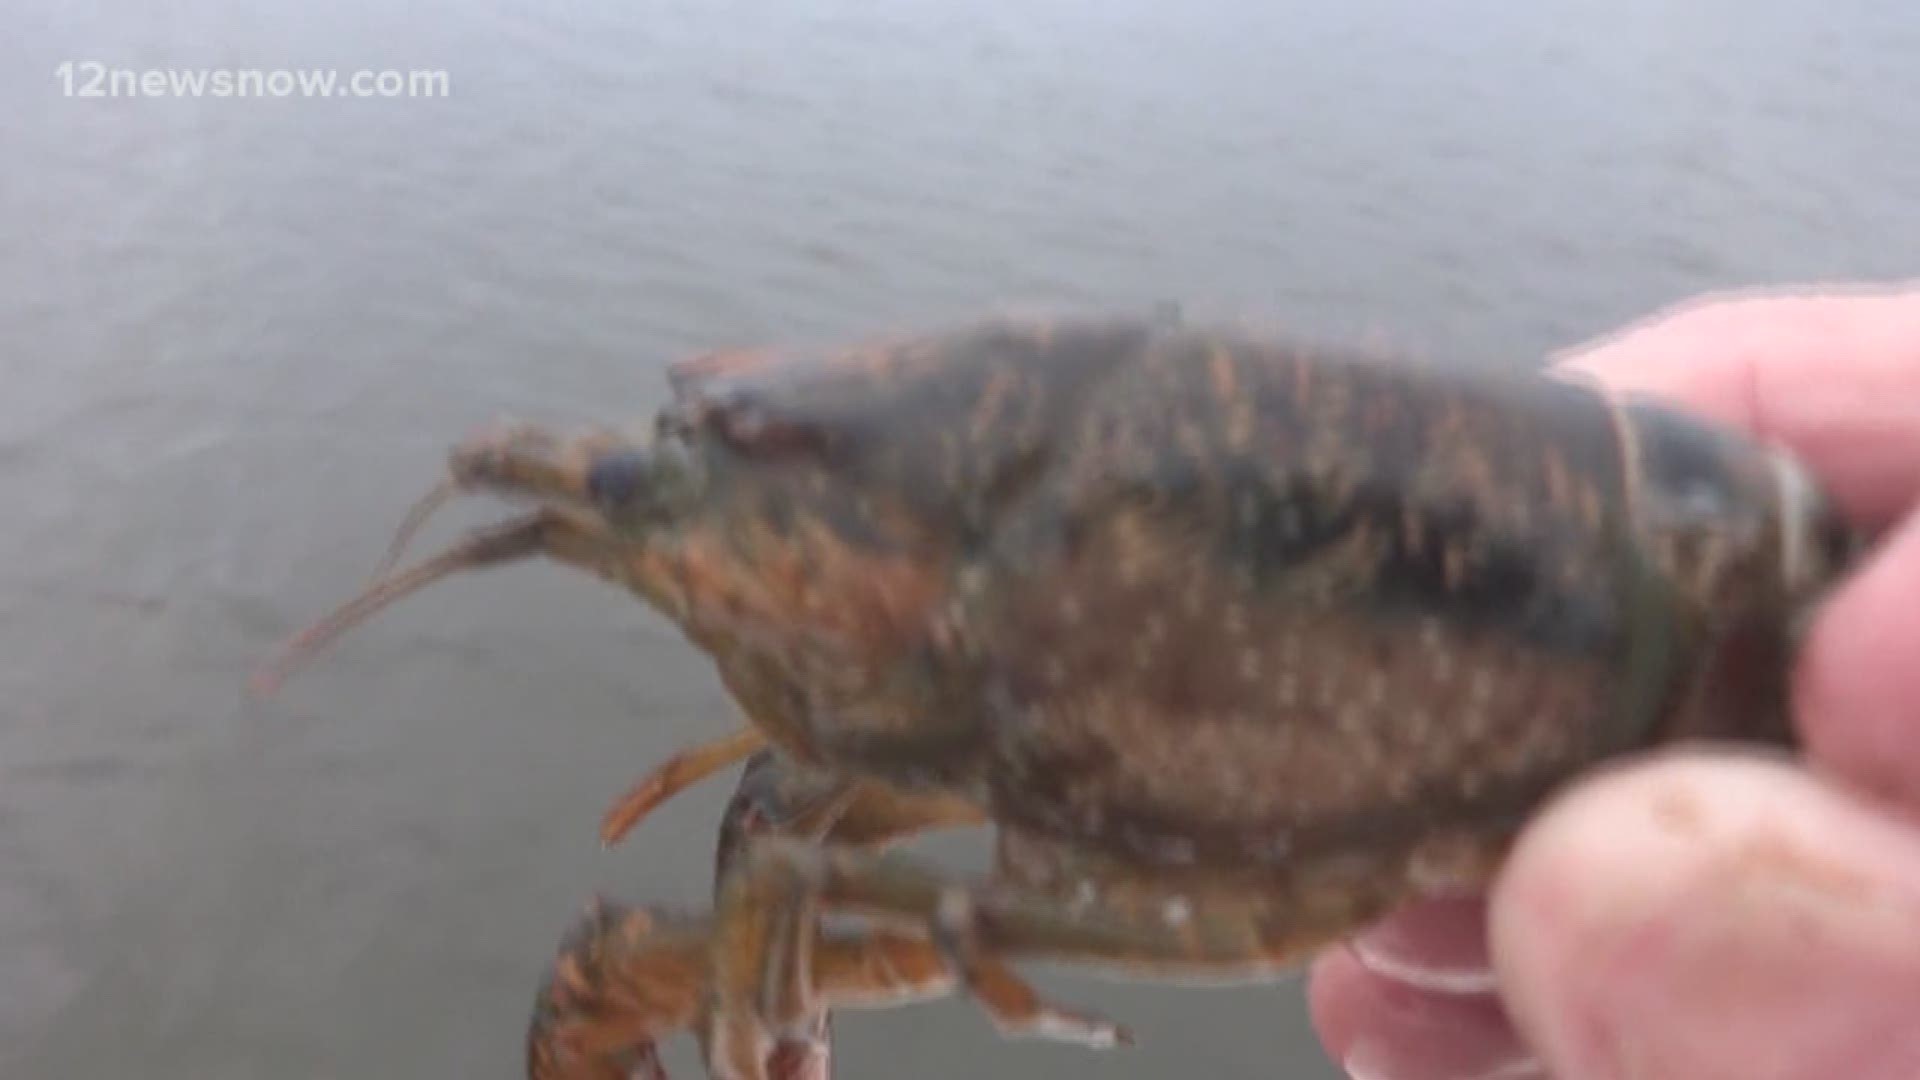 Giant crawfish left behind in live well